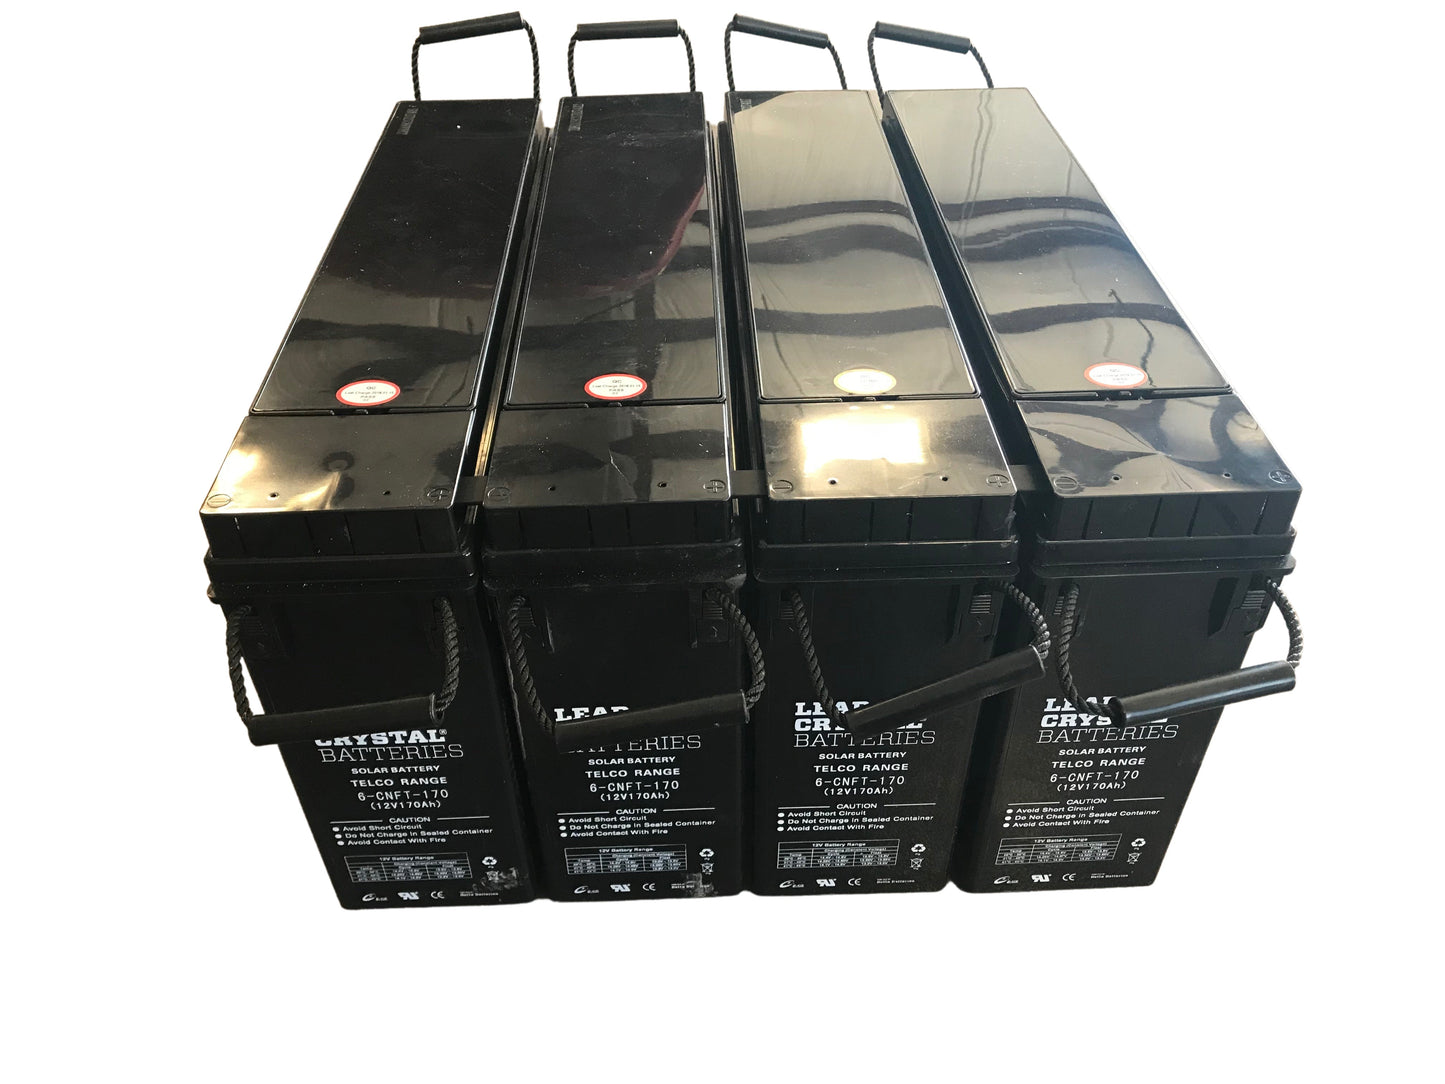 48V 36.8 KWH LCB battery pack for solar, perfect for home, rv or off-grid